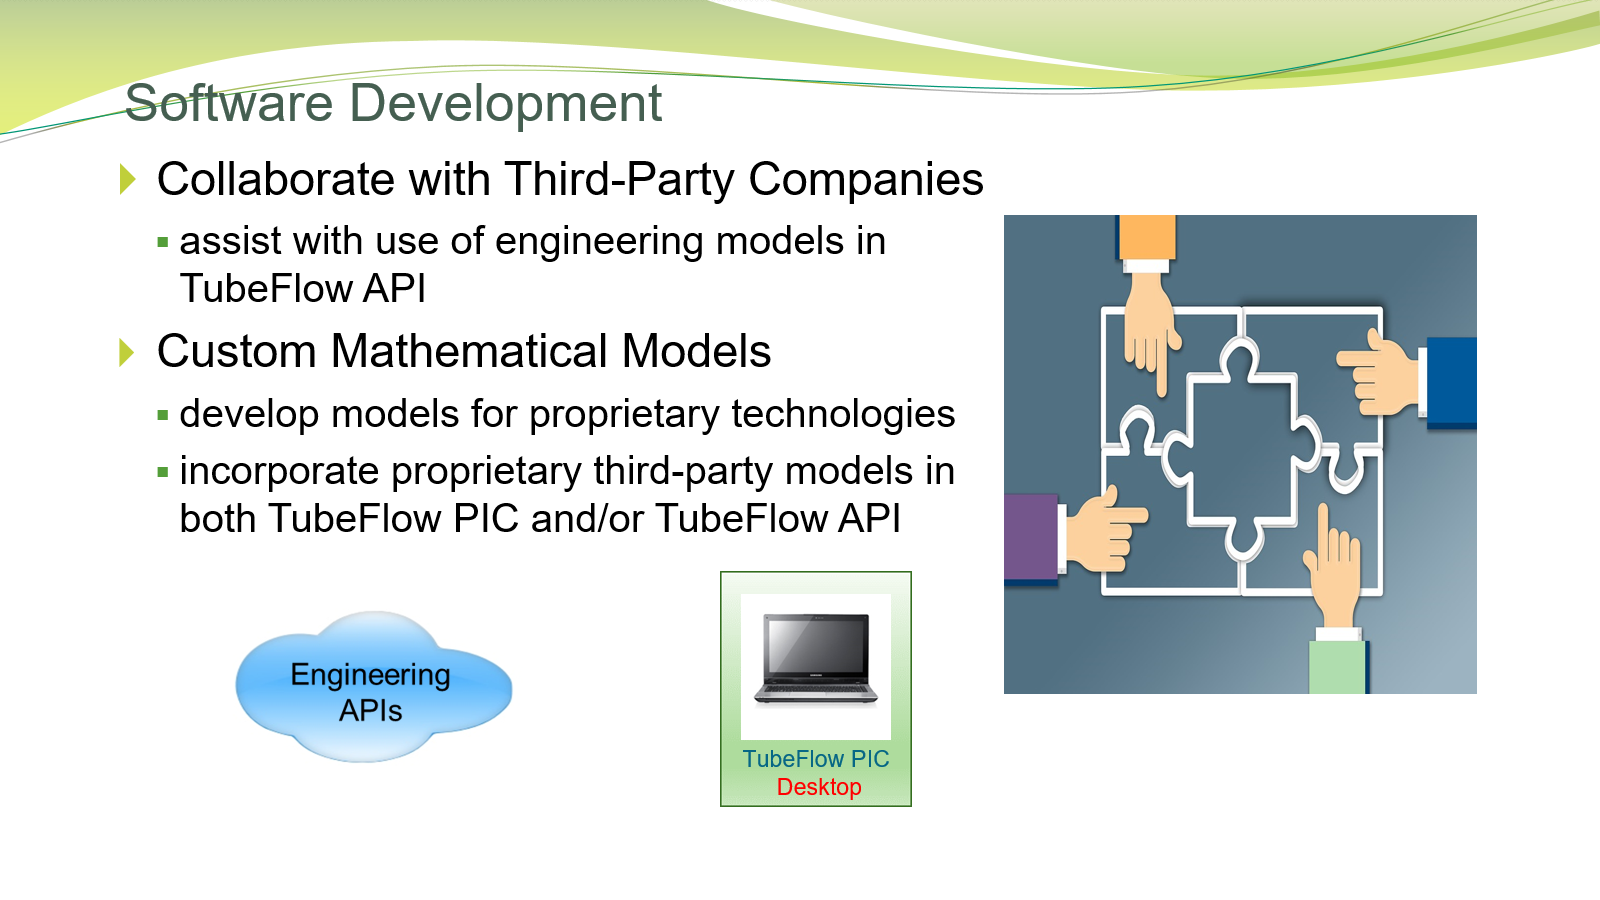 Software Development: Collaborate with Third-Party Companies, Custom Mathematical Models